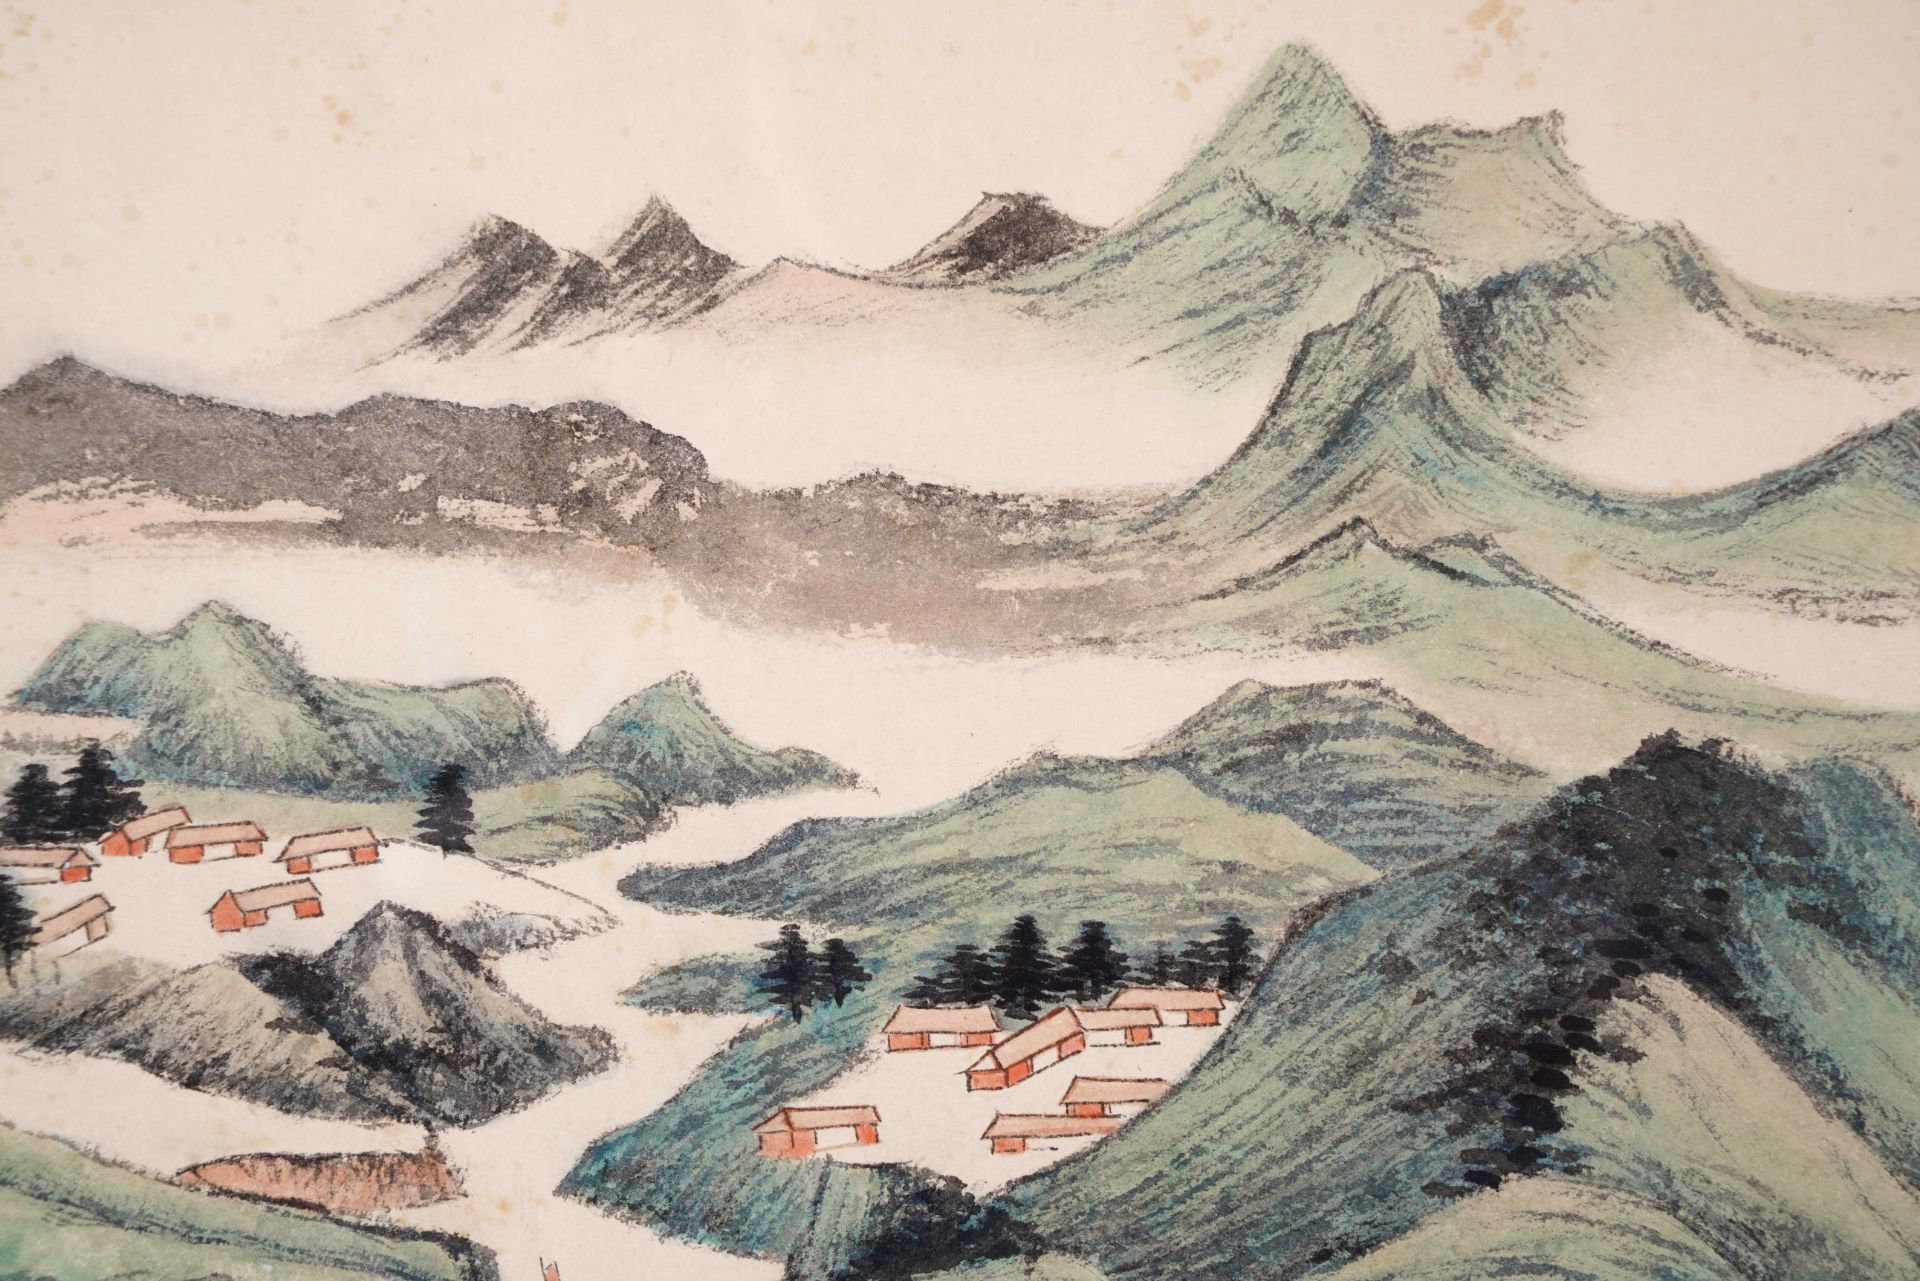 A Chinese Frame Painting By Zhang Daqian - Image 5 of 19